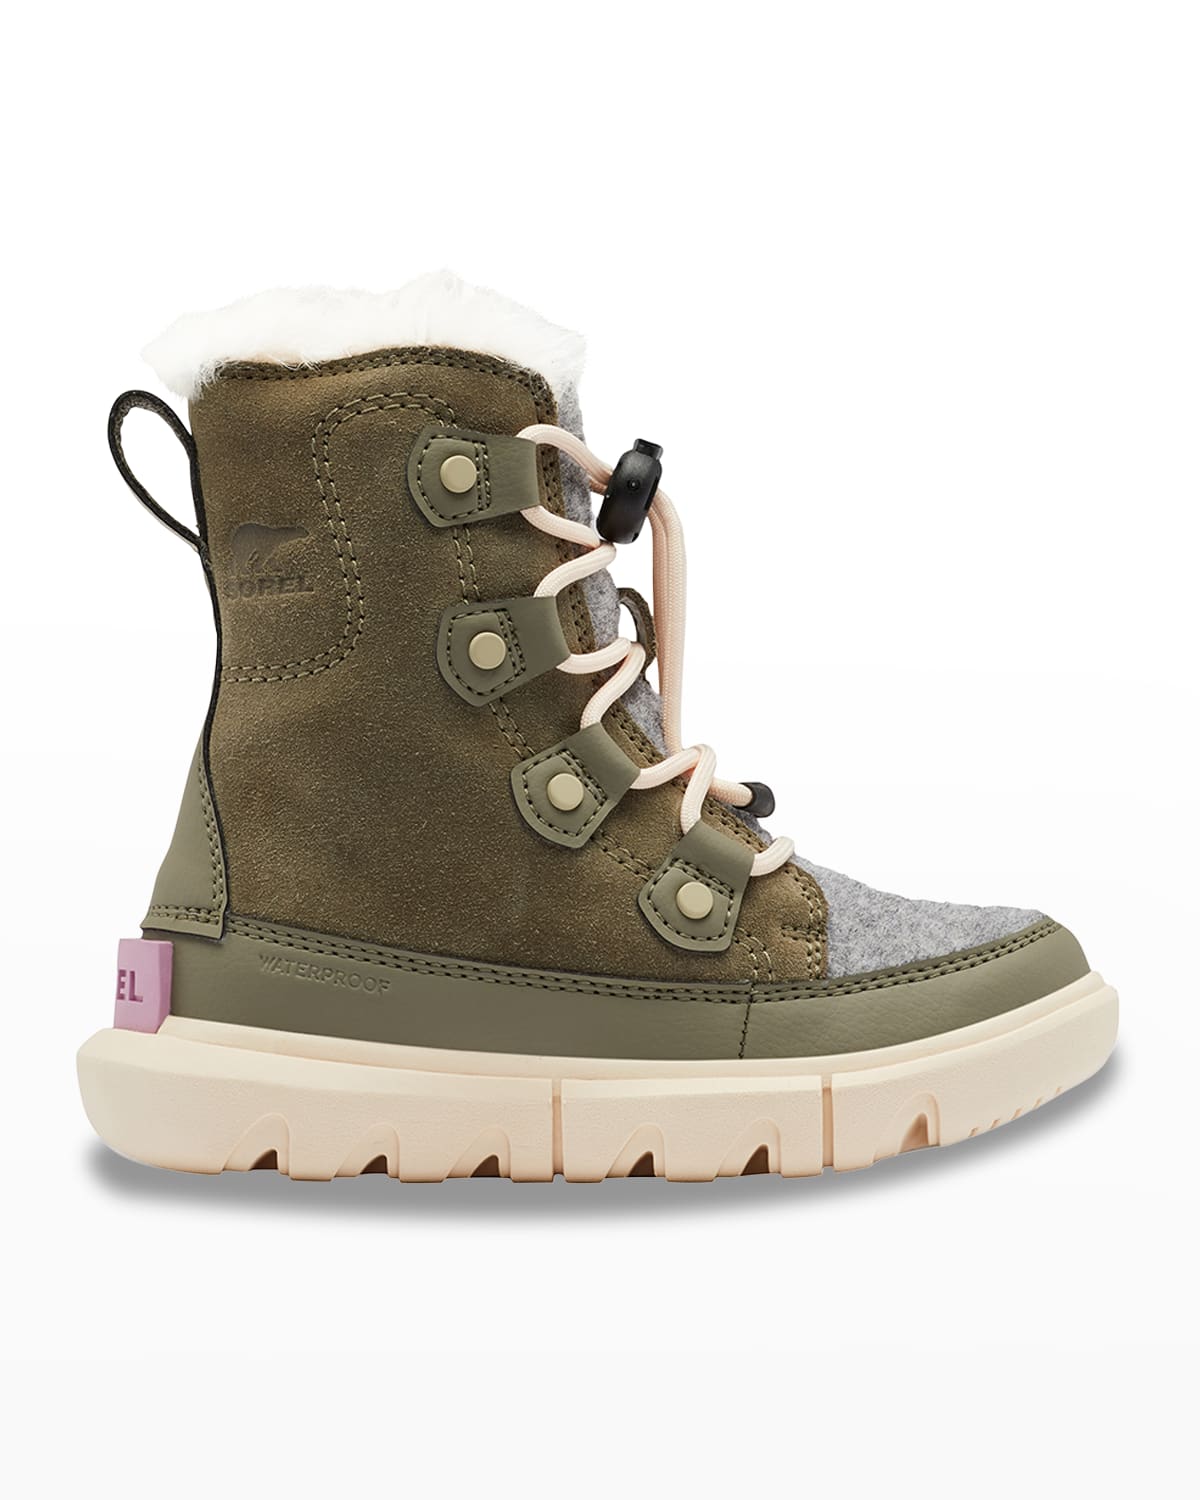 Shop Sorel Kid's Exploder Water-resistant Snow Boots, Toddler/kids In Stone/green/white